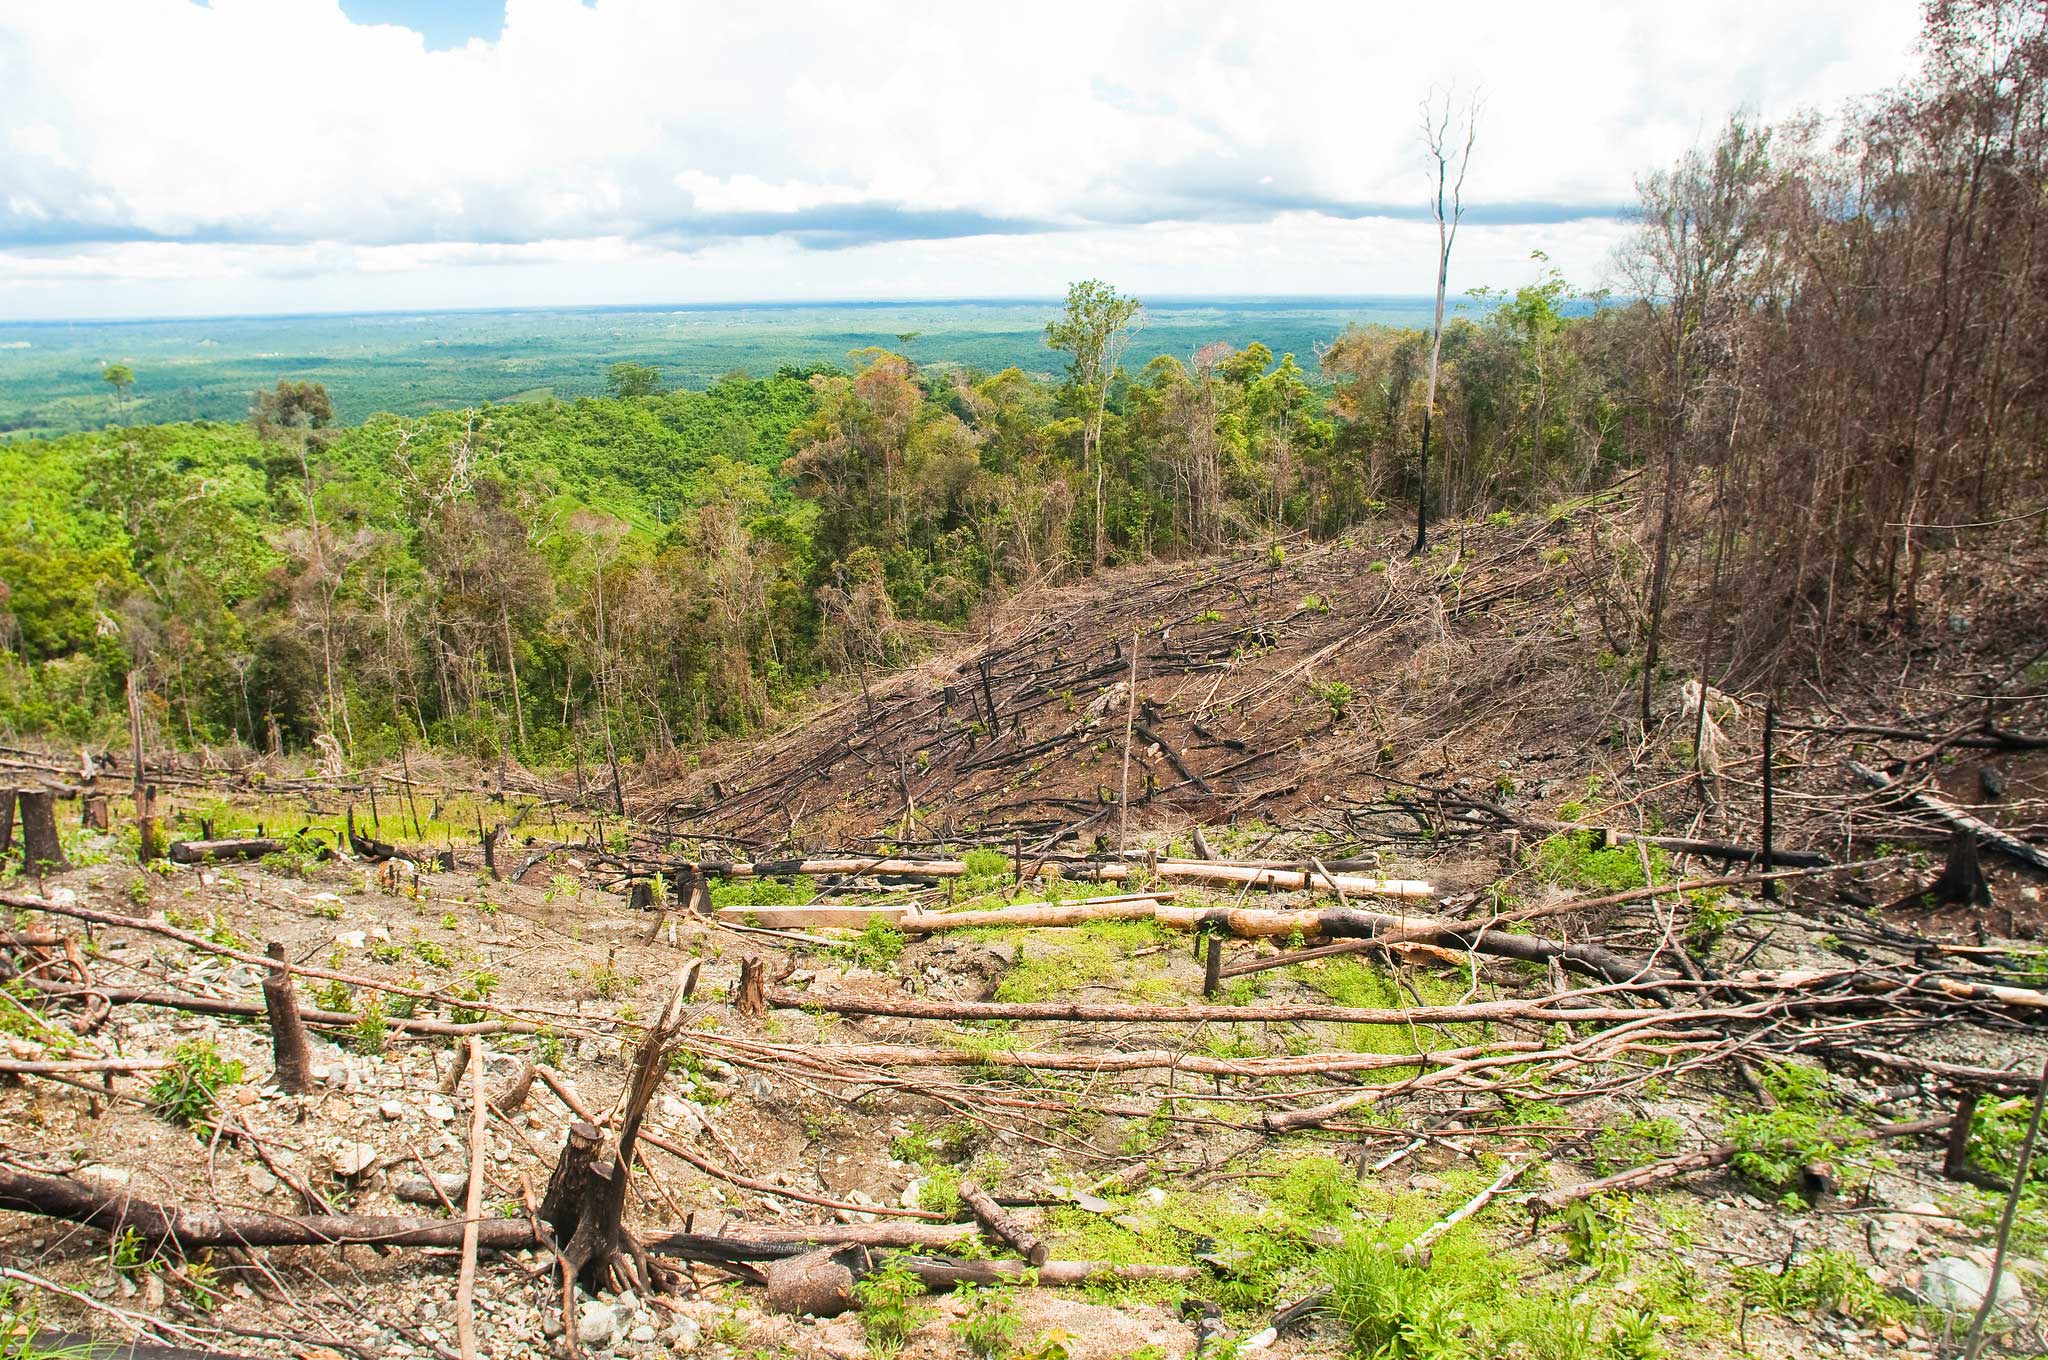 Photograph of cleared land in Borneo, Indonesia. The photo shows a hilly landscape partially covered in forest. In the foreground, the trees have been cleared, leaving stumps and branches.